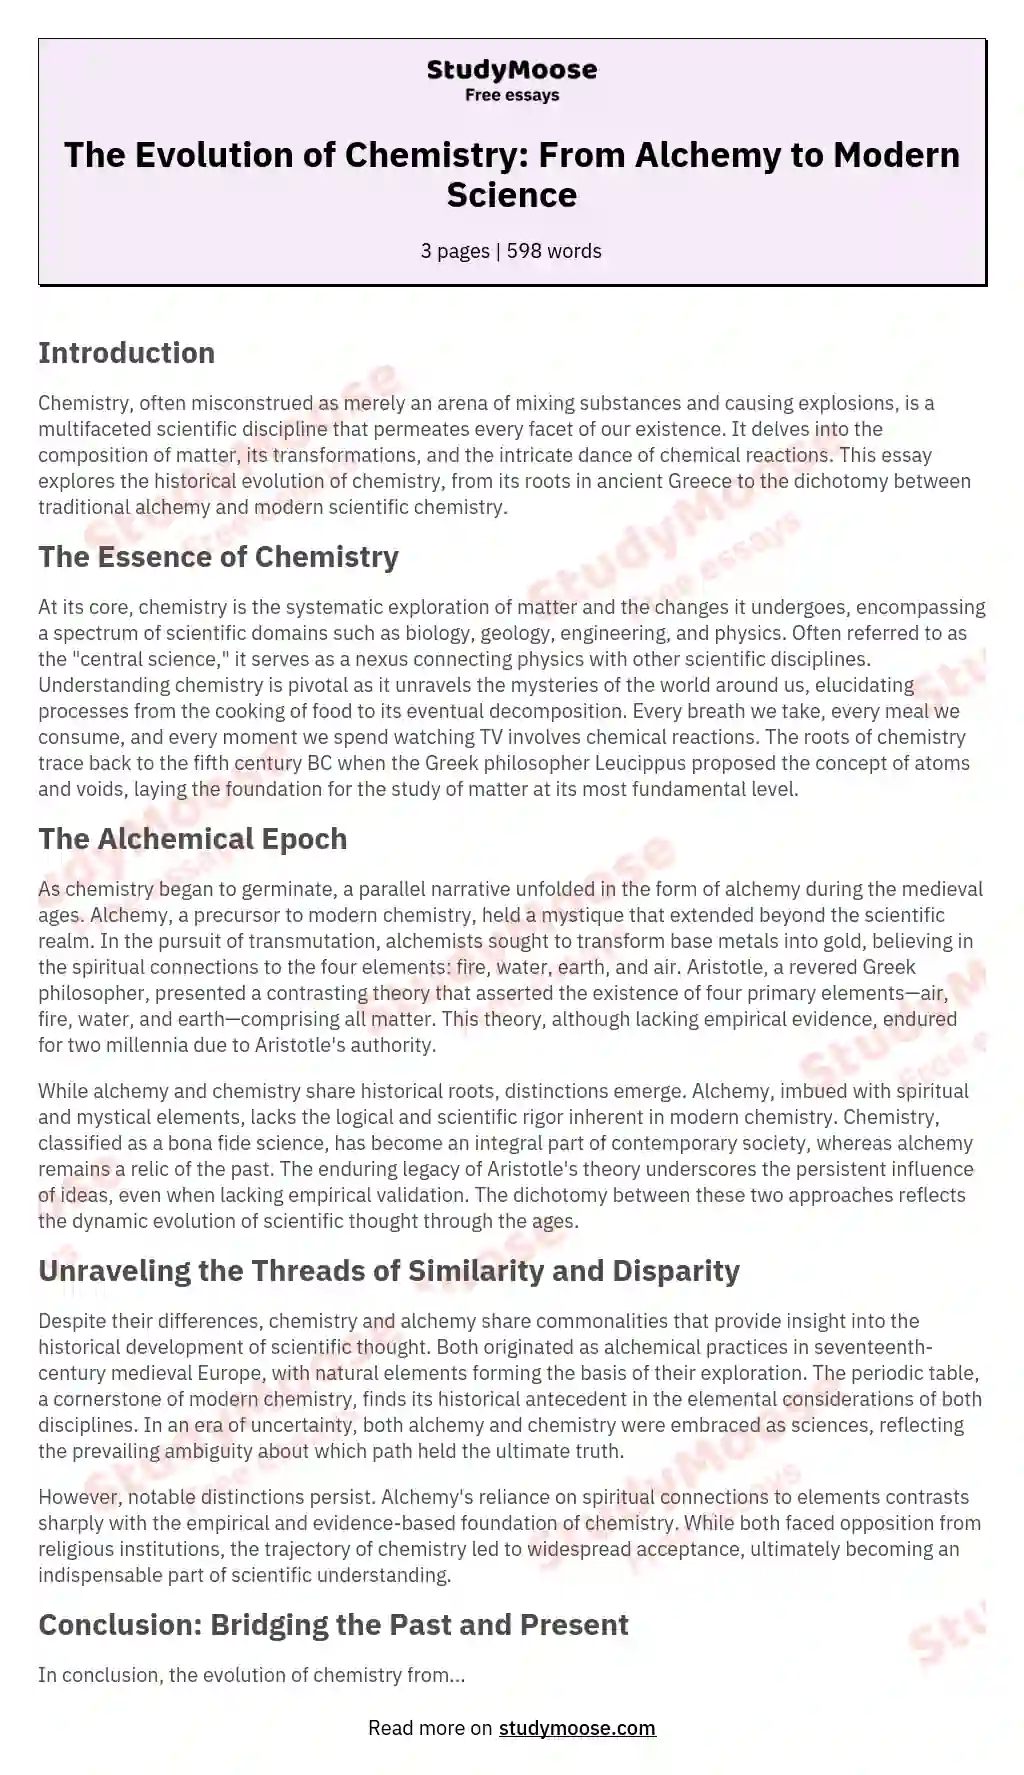 The Evolution of Chemistry: From Alchemy to Modern Science essay